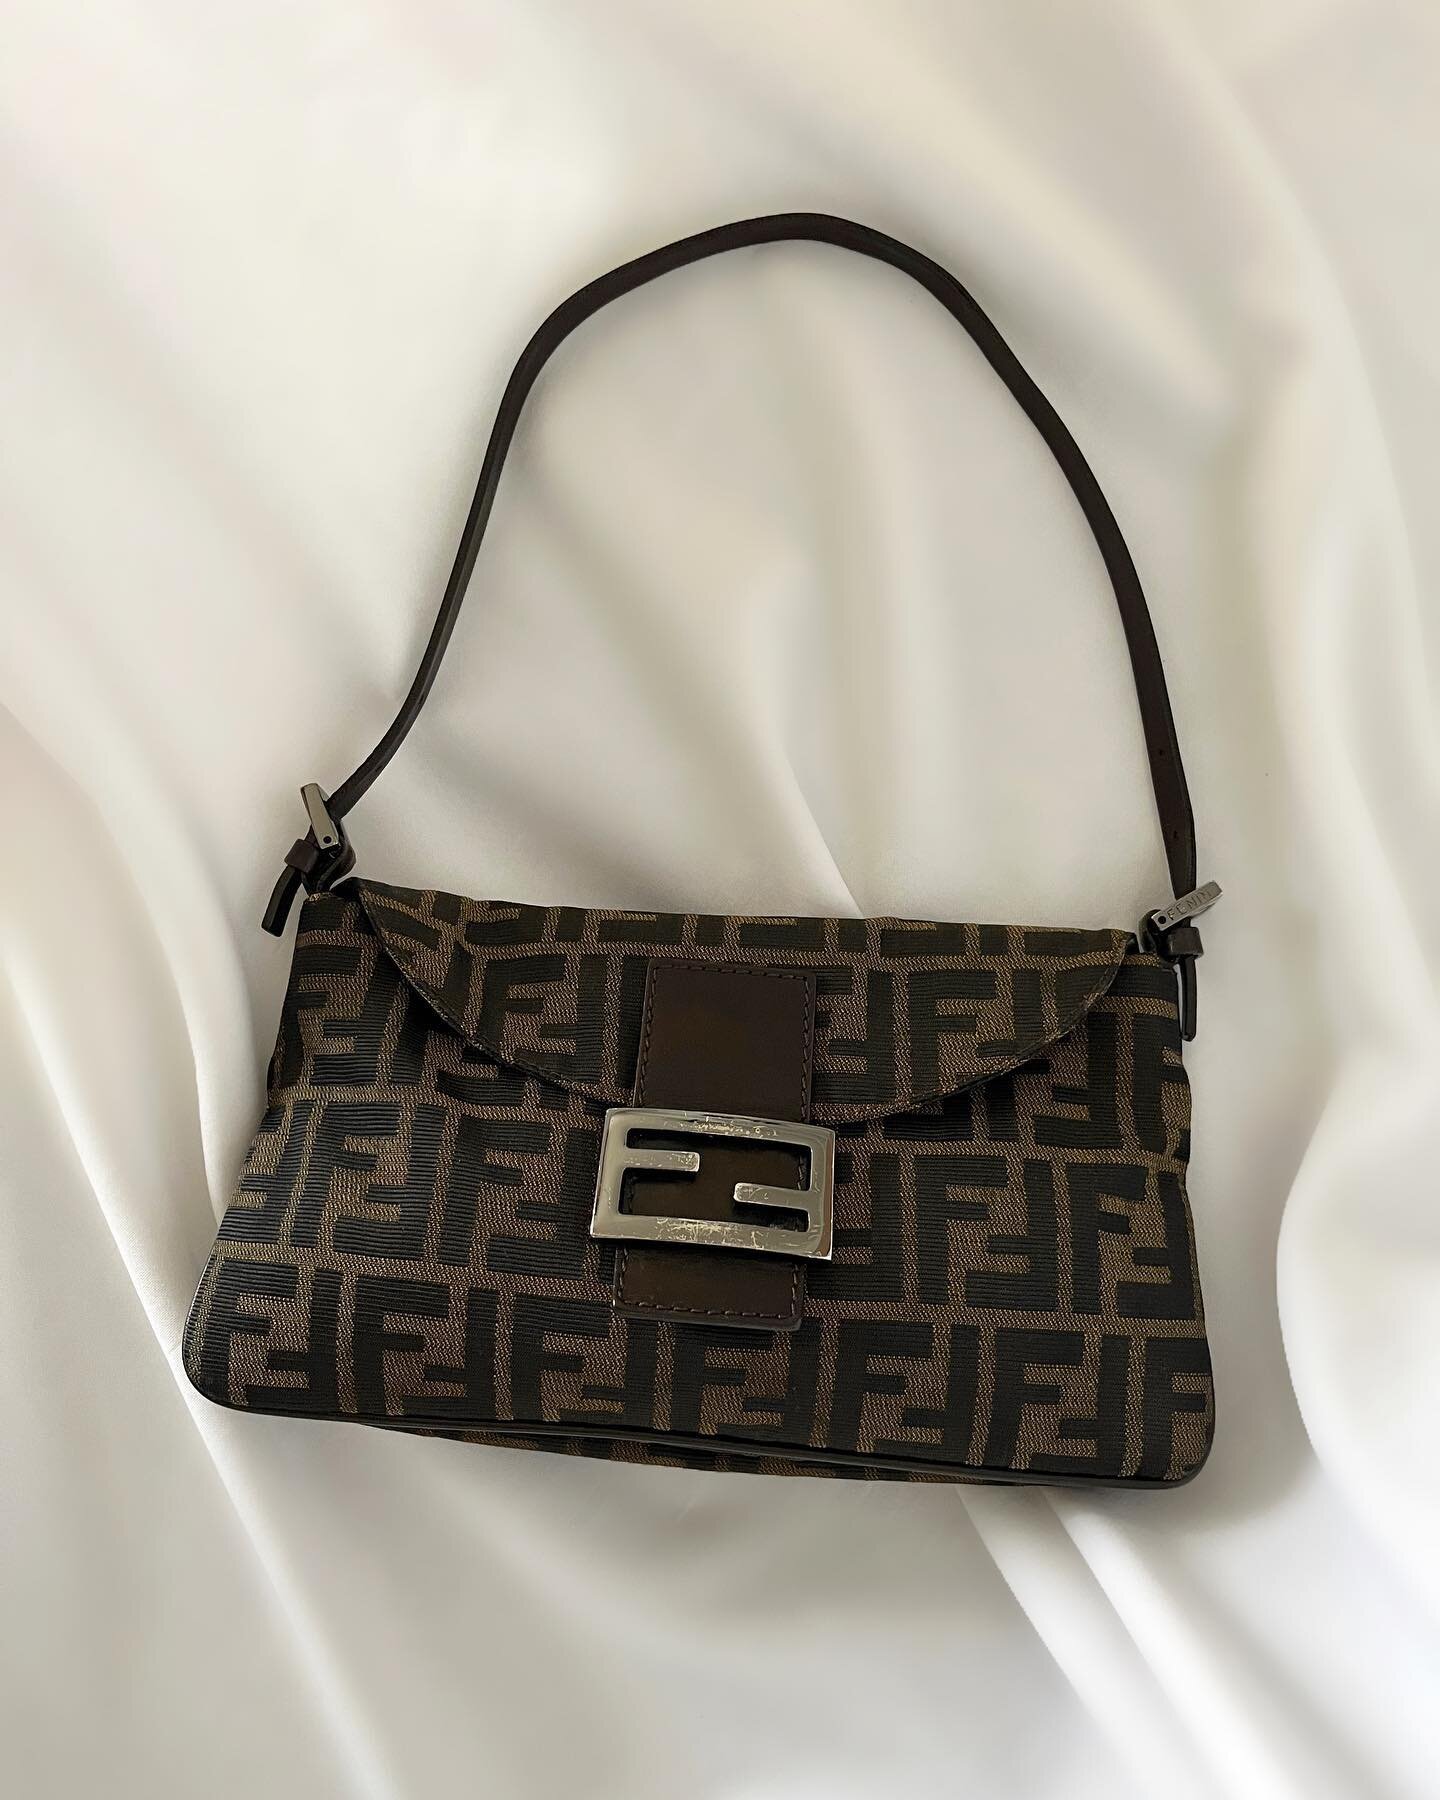 Fendi Zucca Double Flap Baguette

Now Available
Link in bio